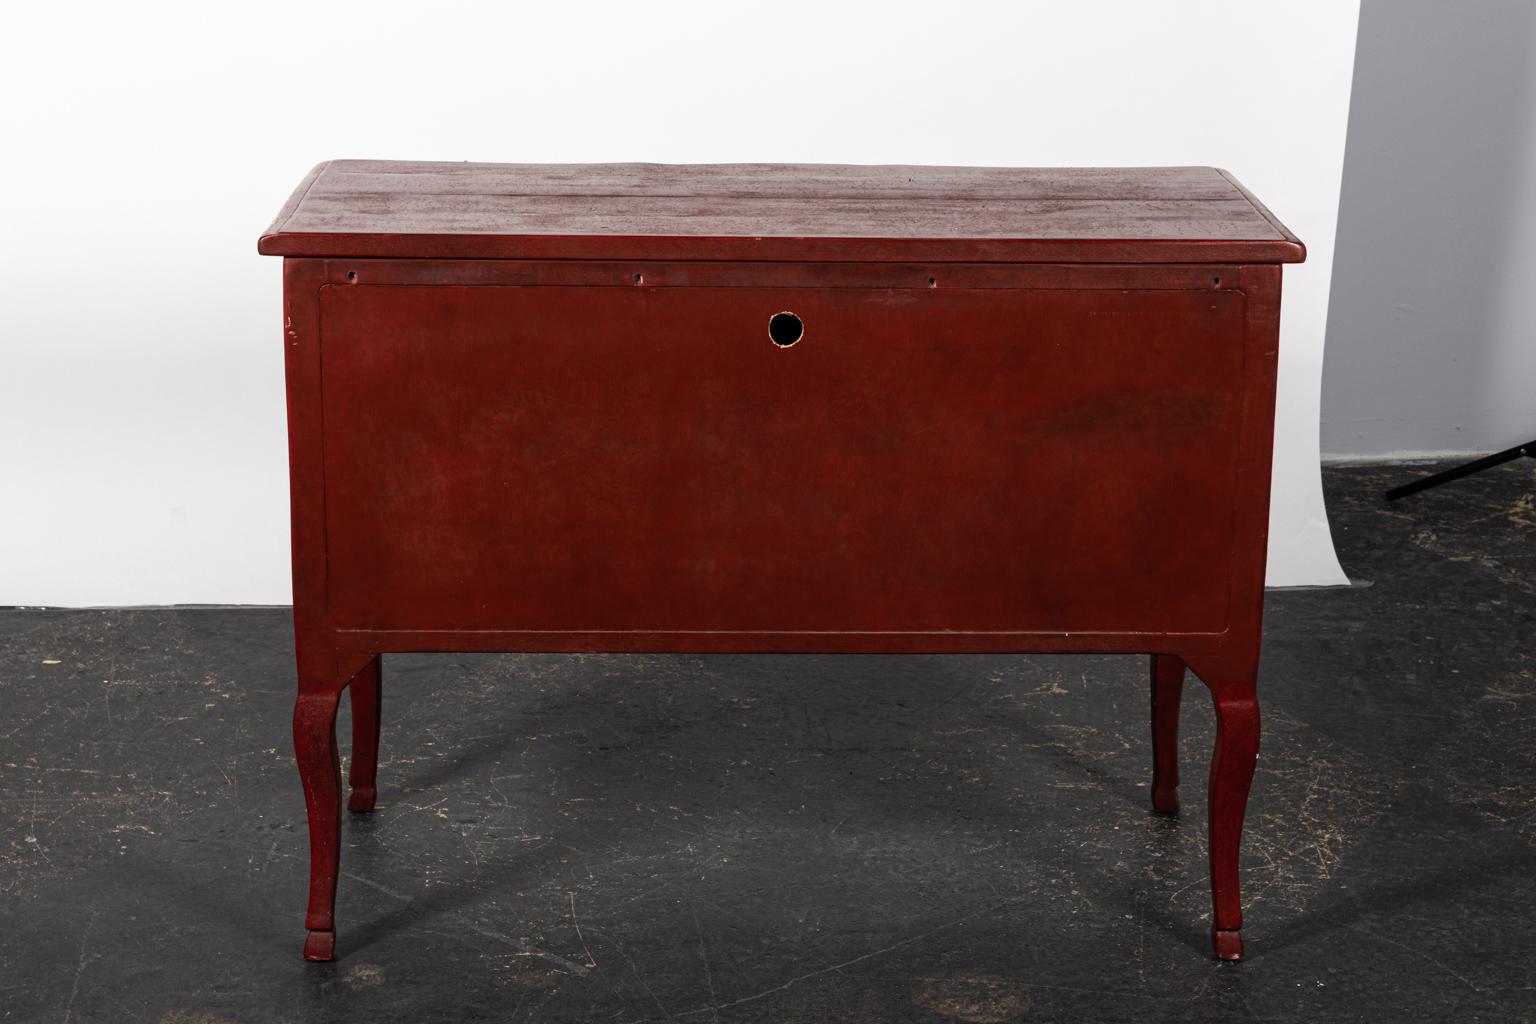 Red painted Continental style two-drawer chest with metal pulls and landscape scenes on the drawer fronts and sides. Please note of wear consistent with age including paint loss and chips.